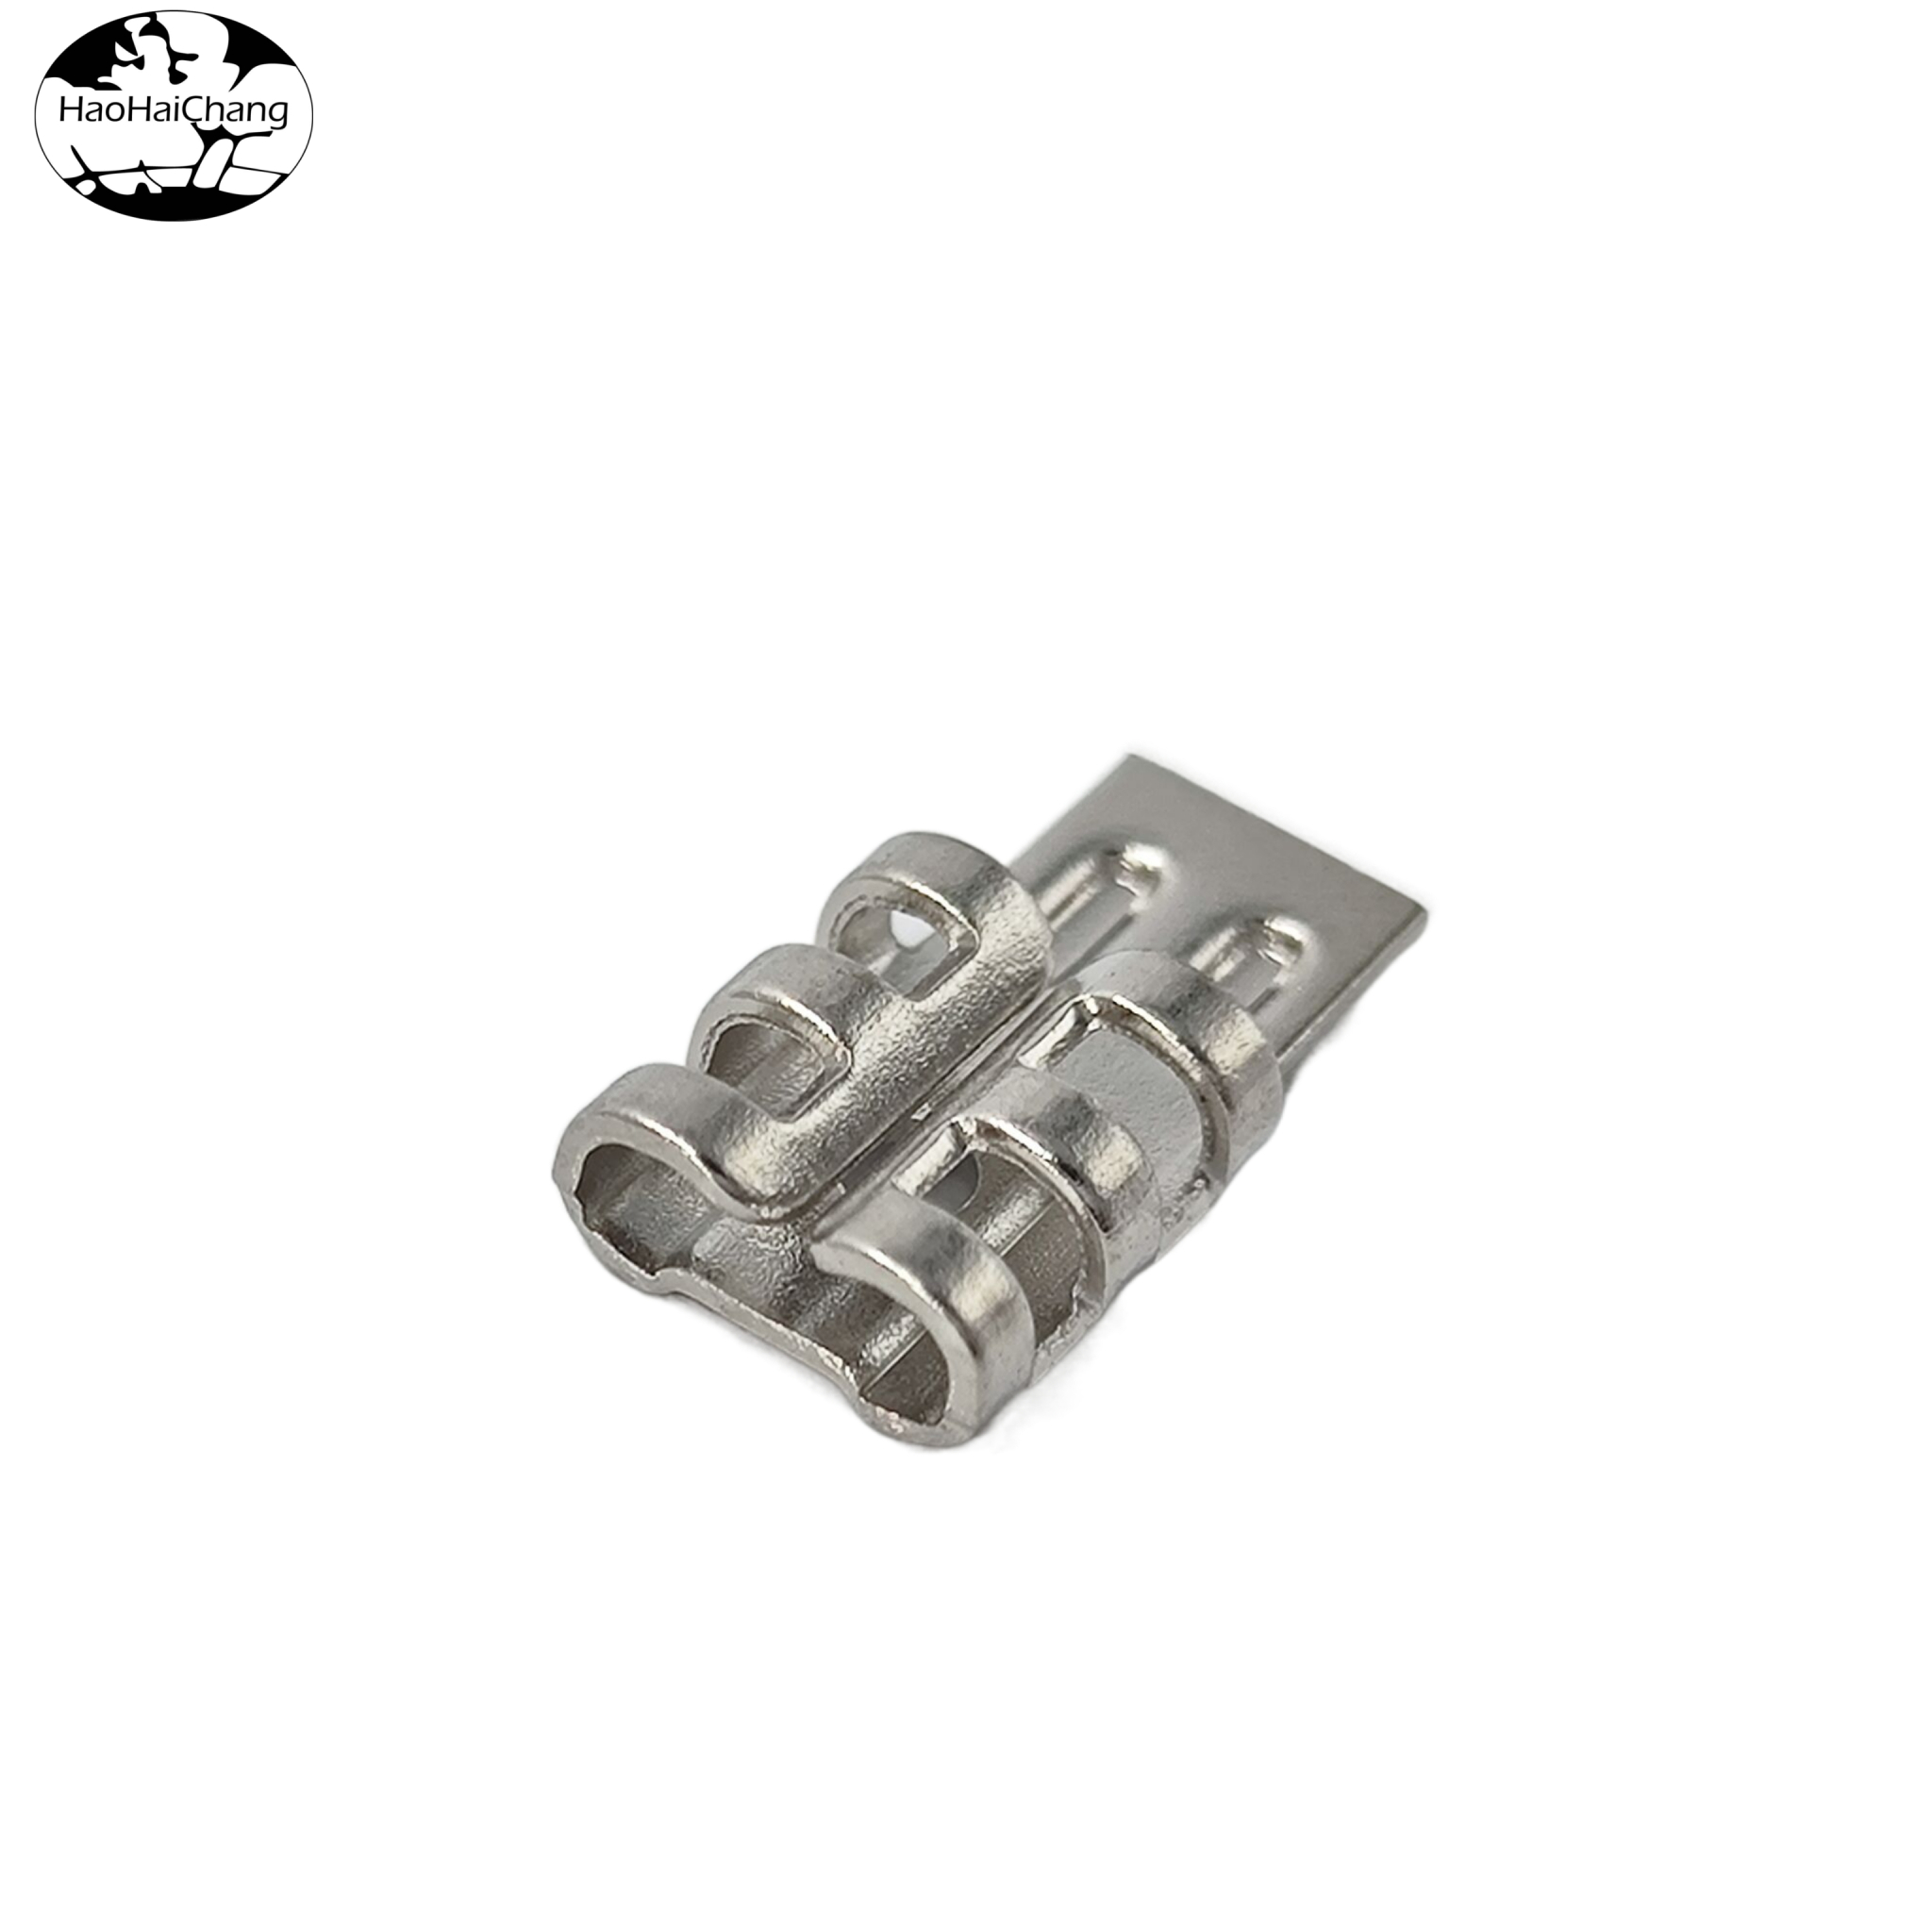 HHC-0251 Connector